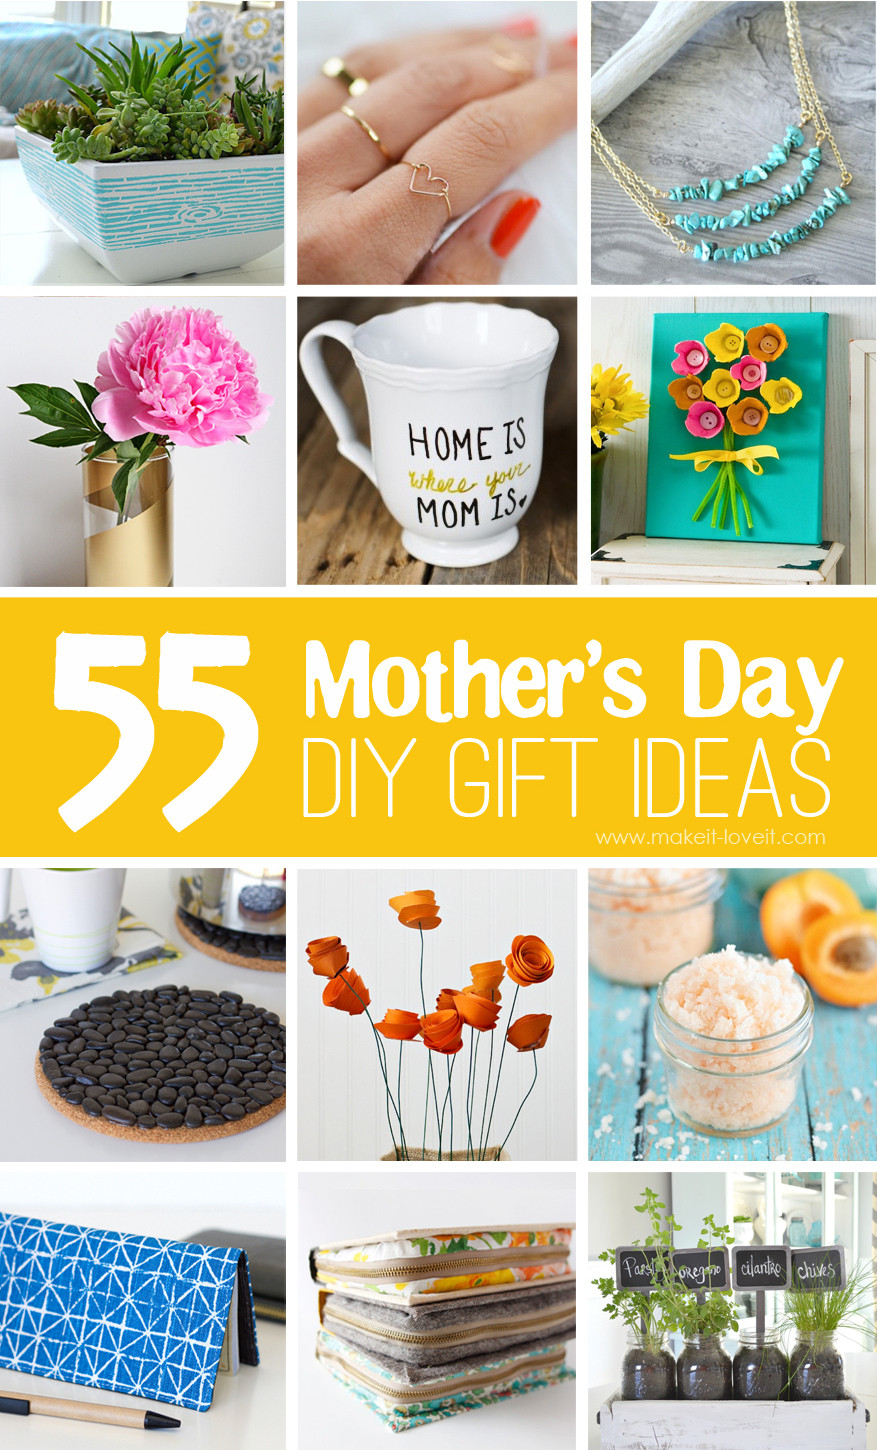 Motherday Gift Ideas
 55 Mother s Day DIY Gift Ideas